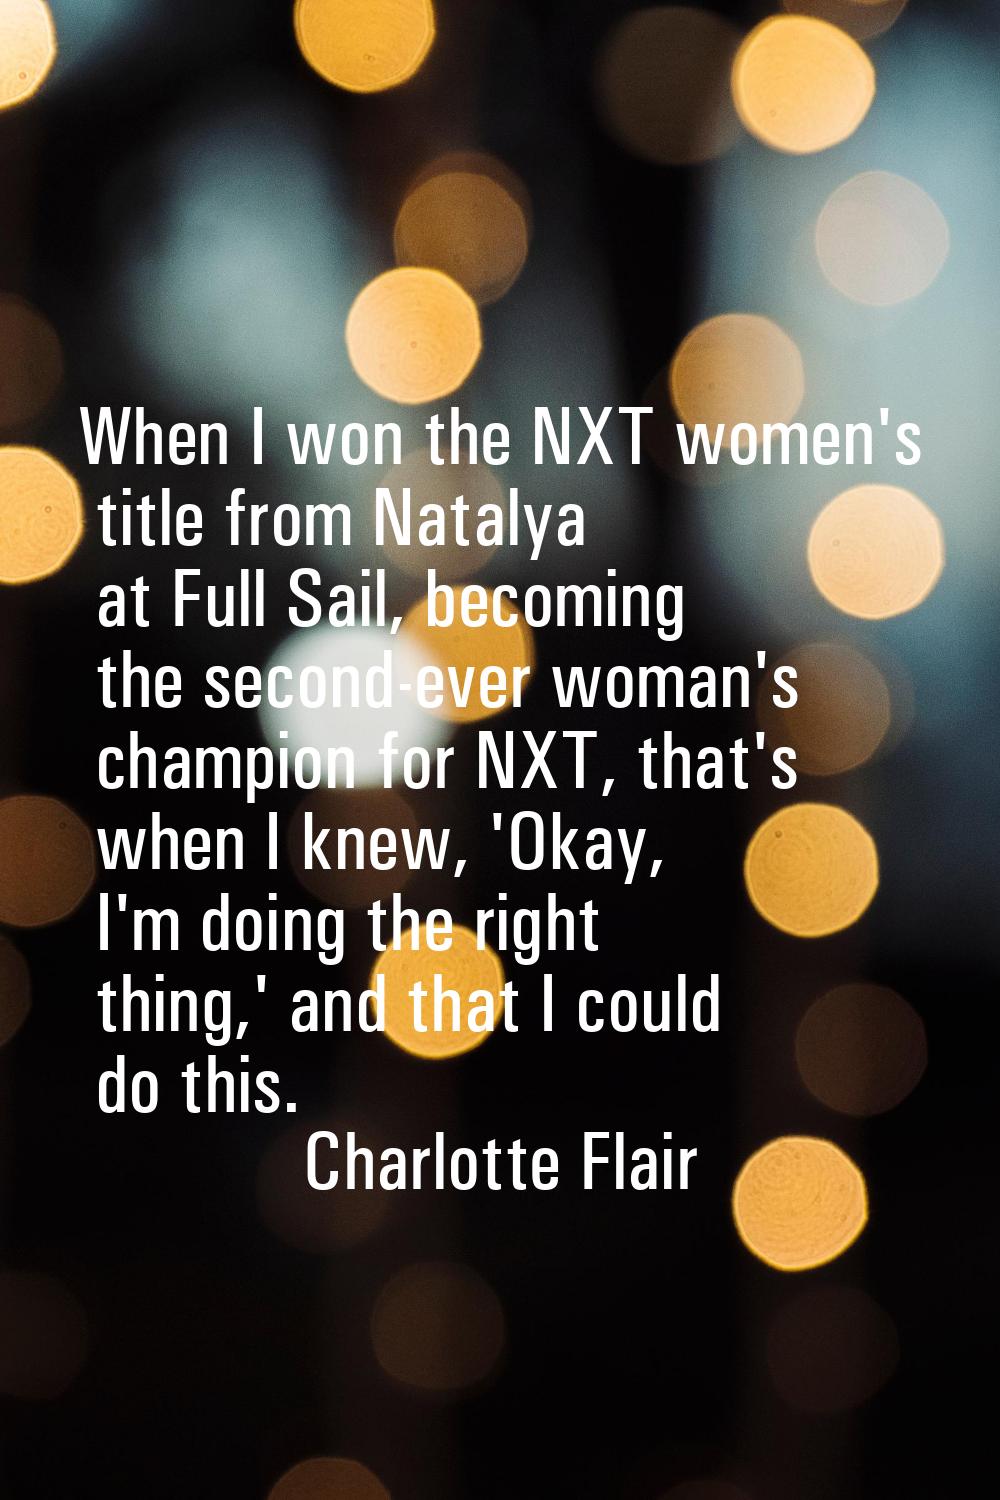 When I won the NXT women's title from Natalya at Full Sail, becoming the second-ever woman's champi